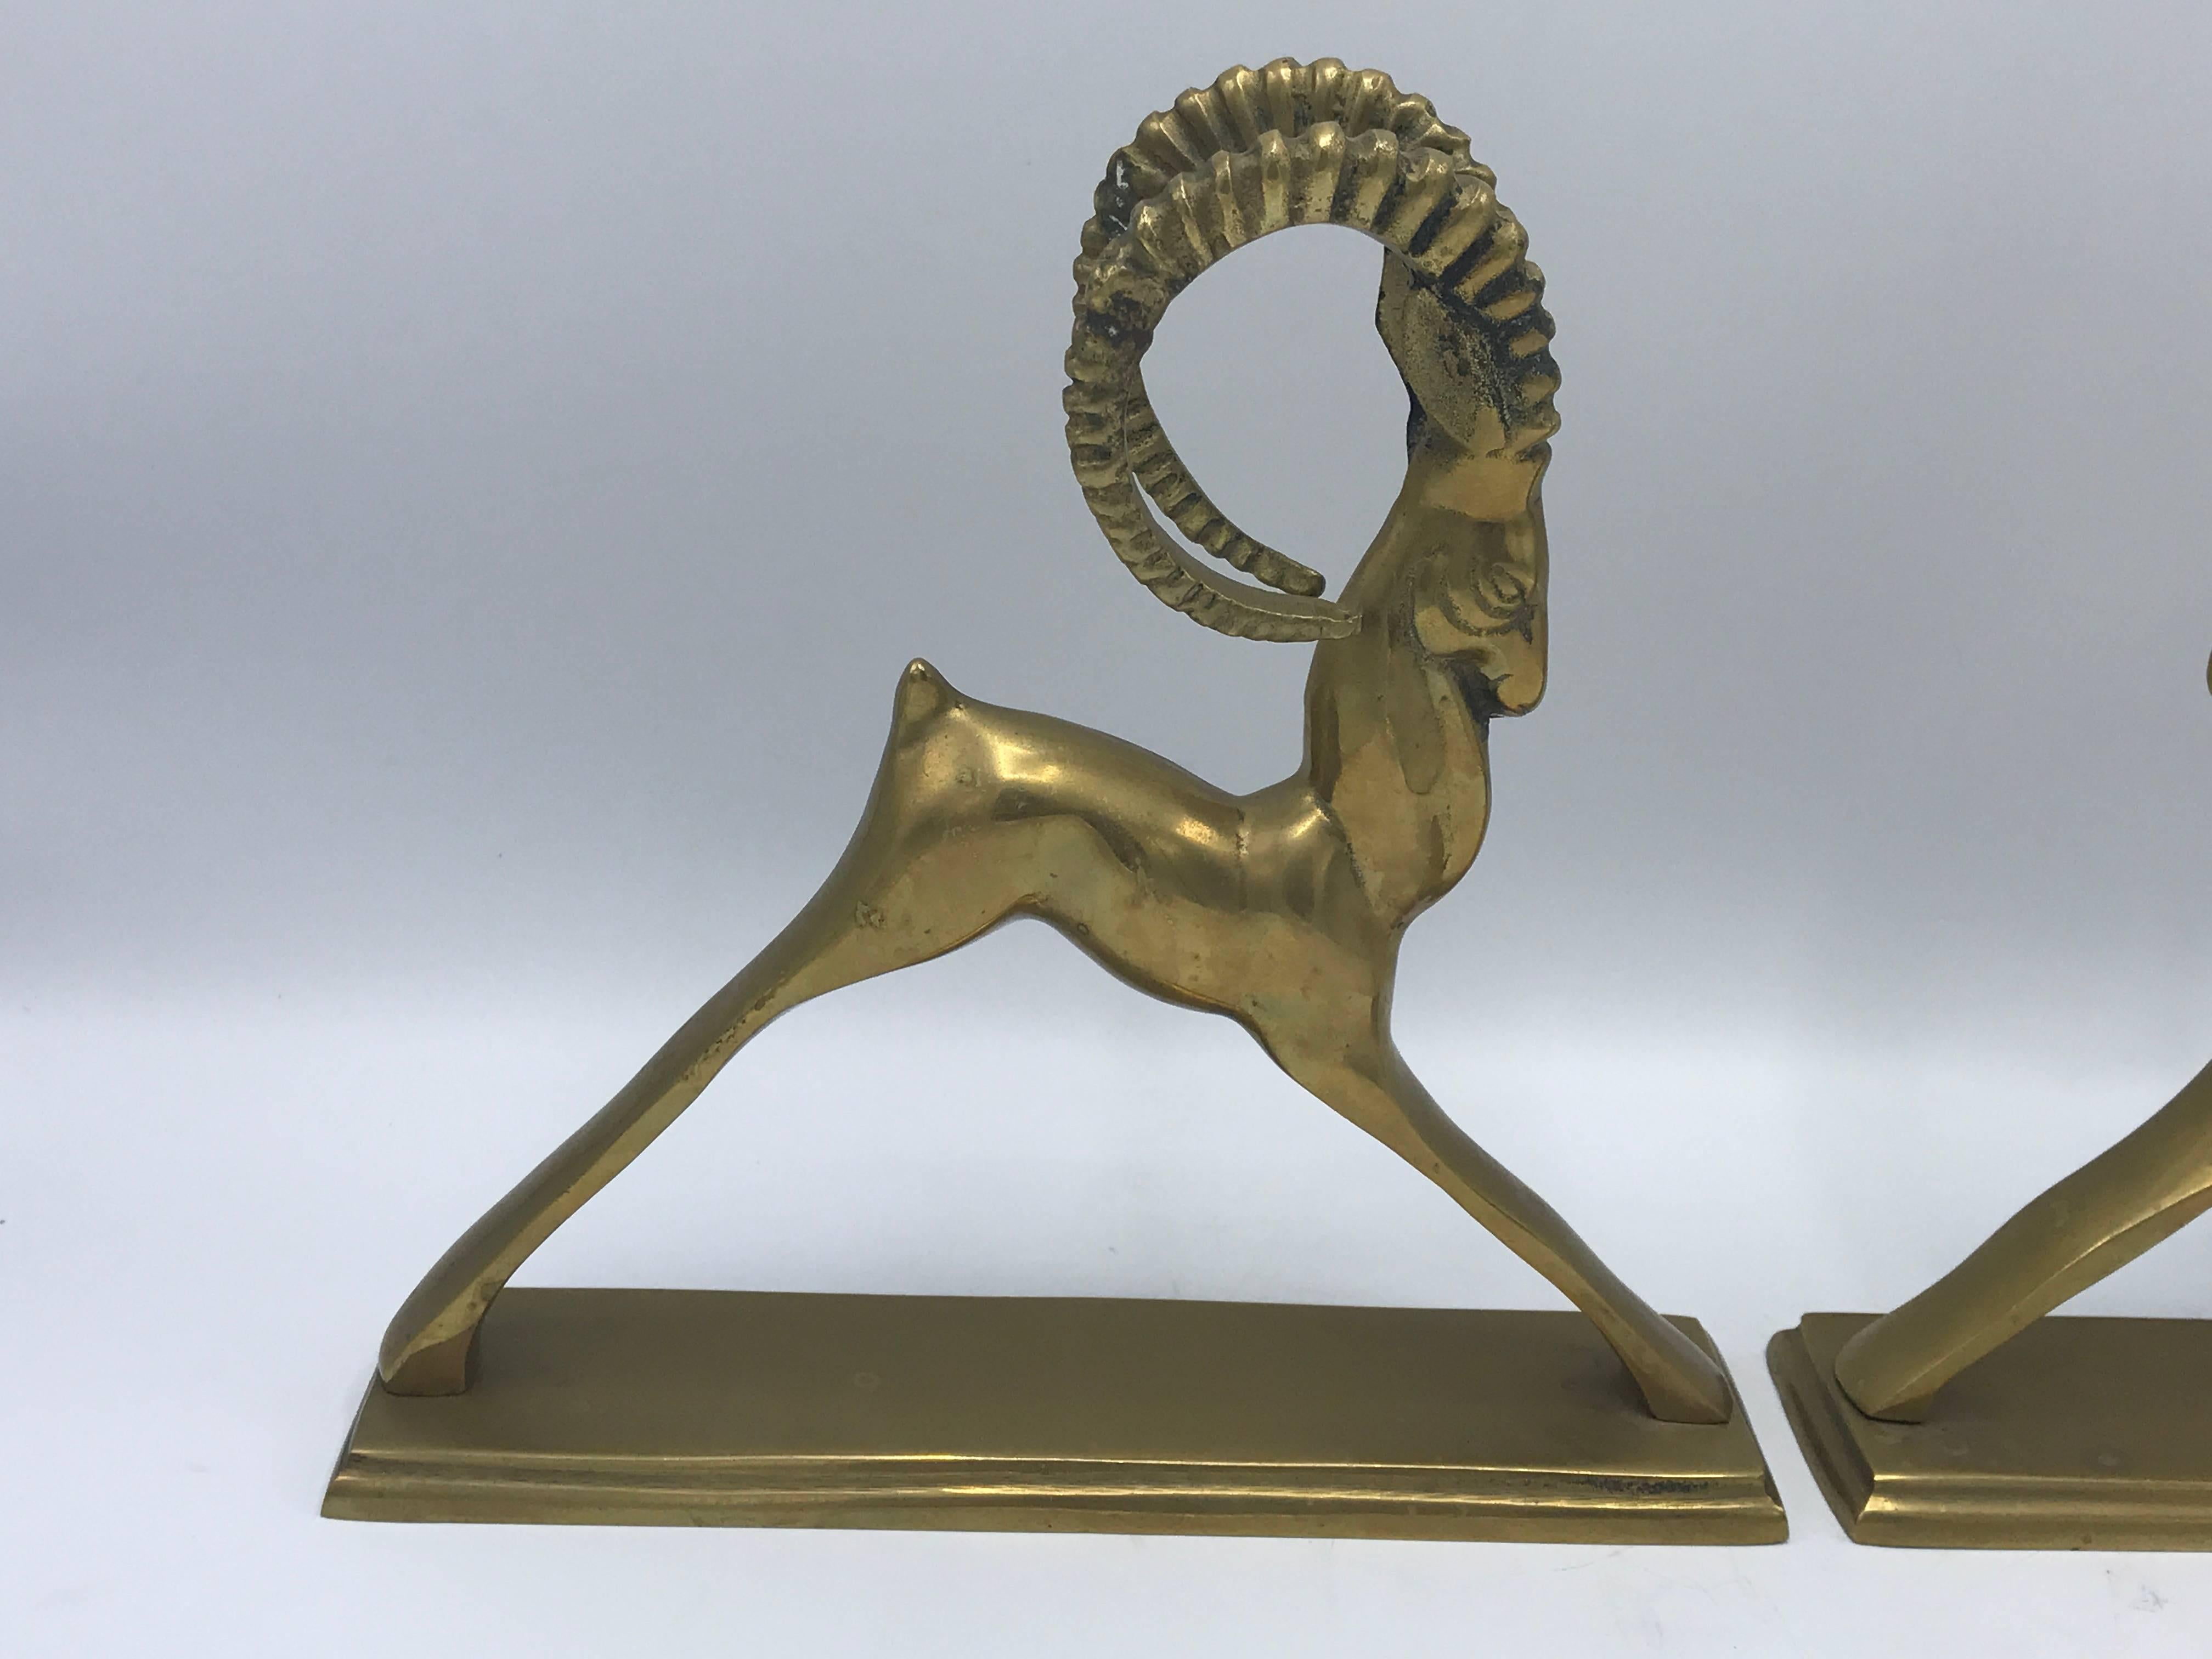 Offered is a beautiful, pair of 1960s brass ibex bookends.